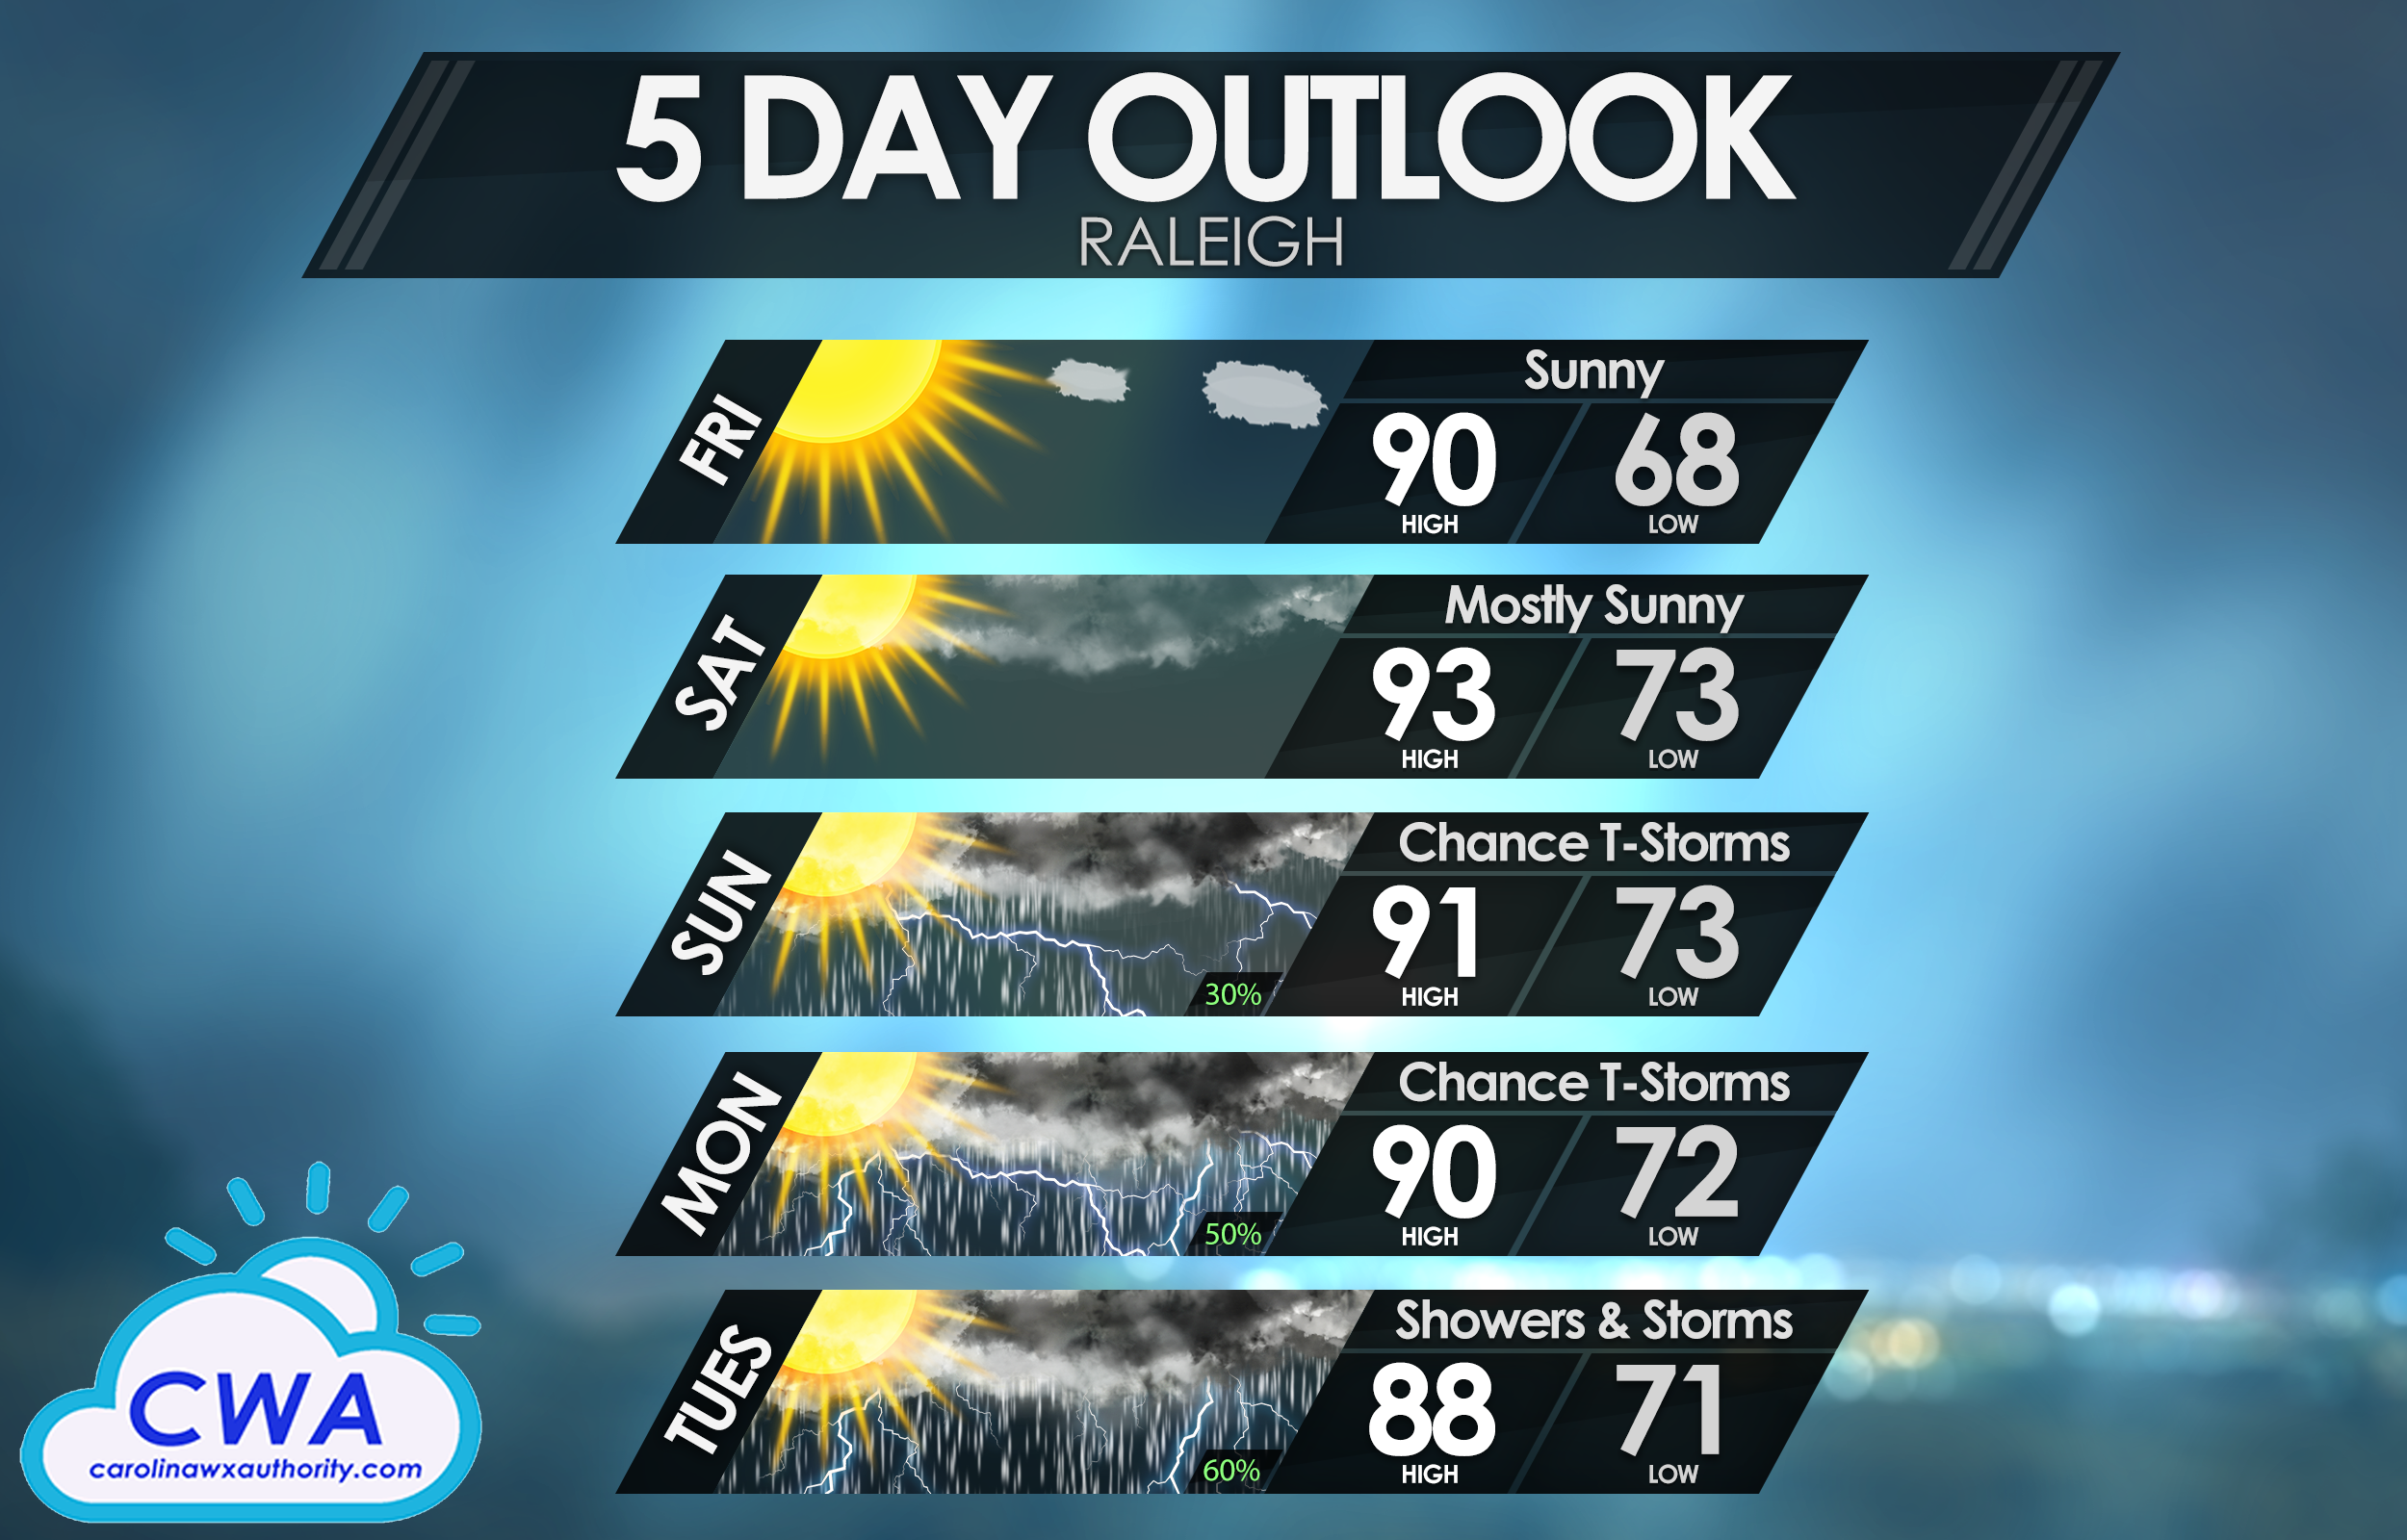 5 Day Forecast for Raleigh, North Carolina